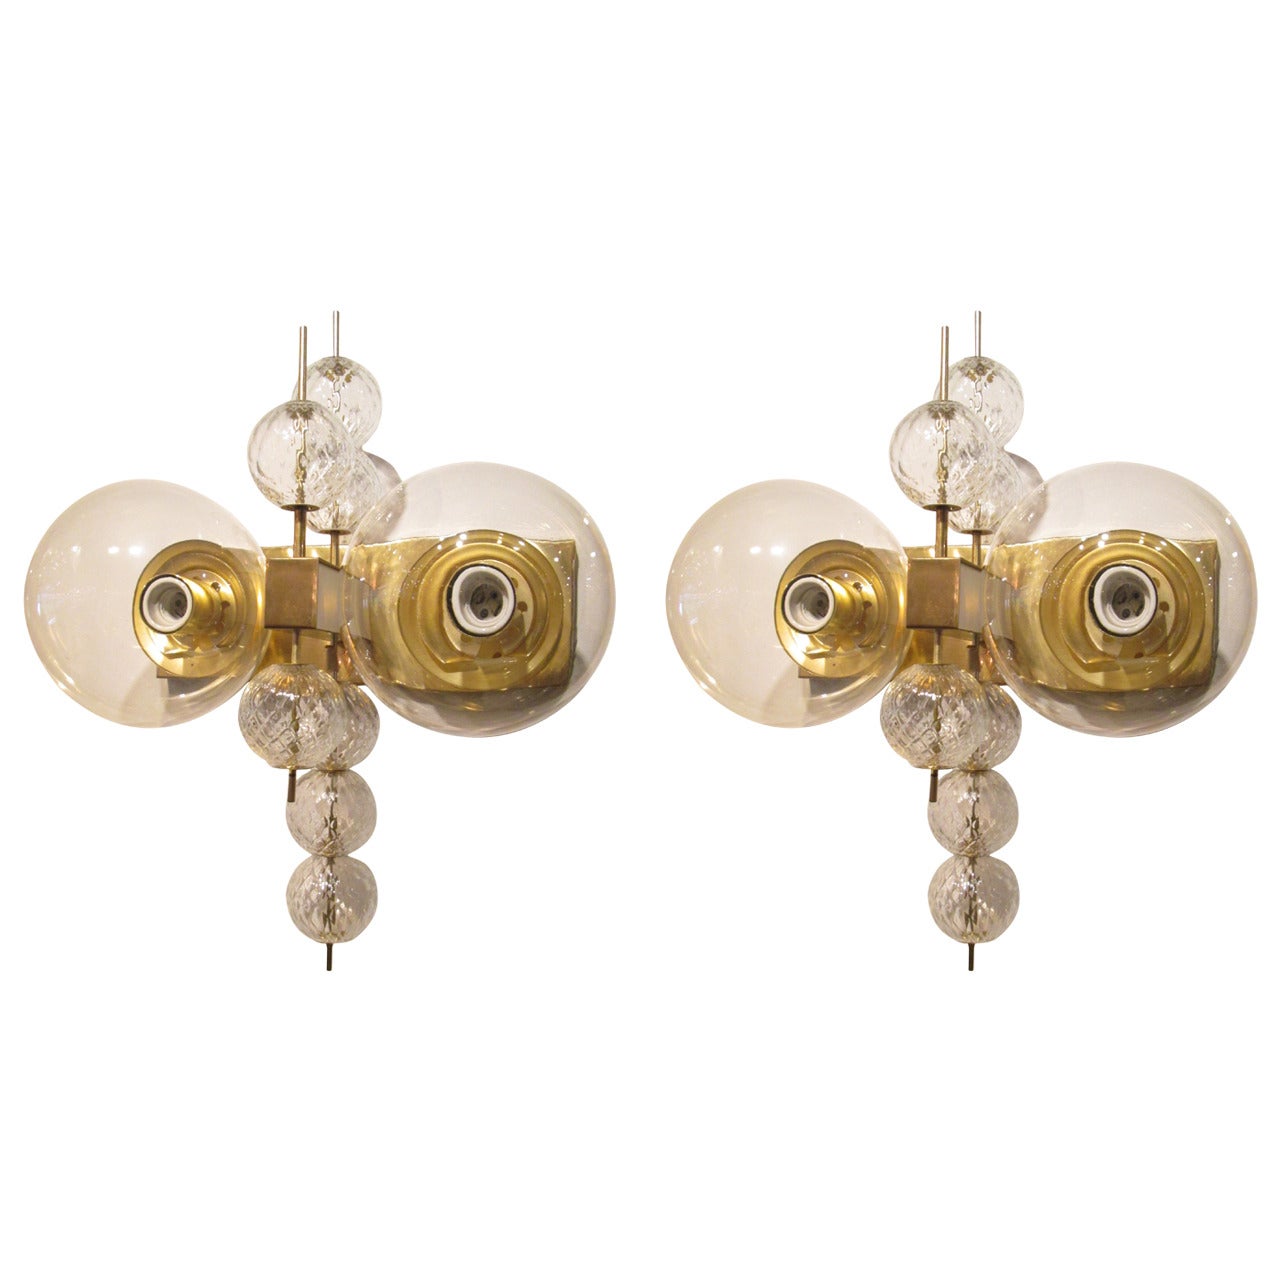 Rare Pair of Modern Brass and Glass Wall Sconces